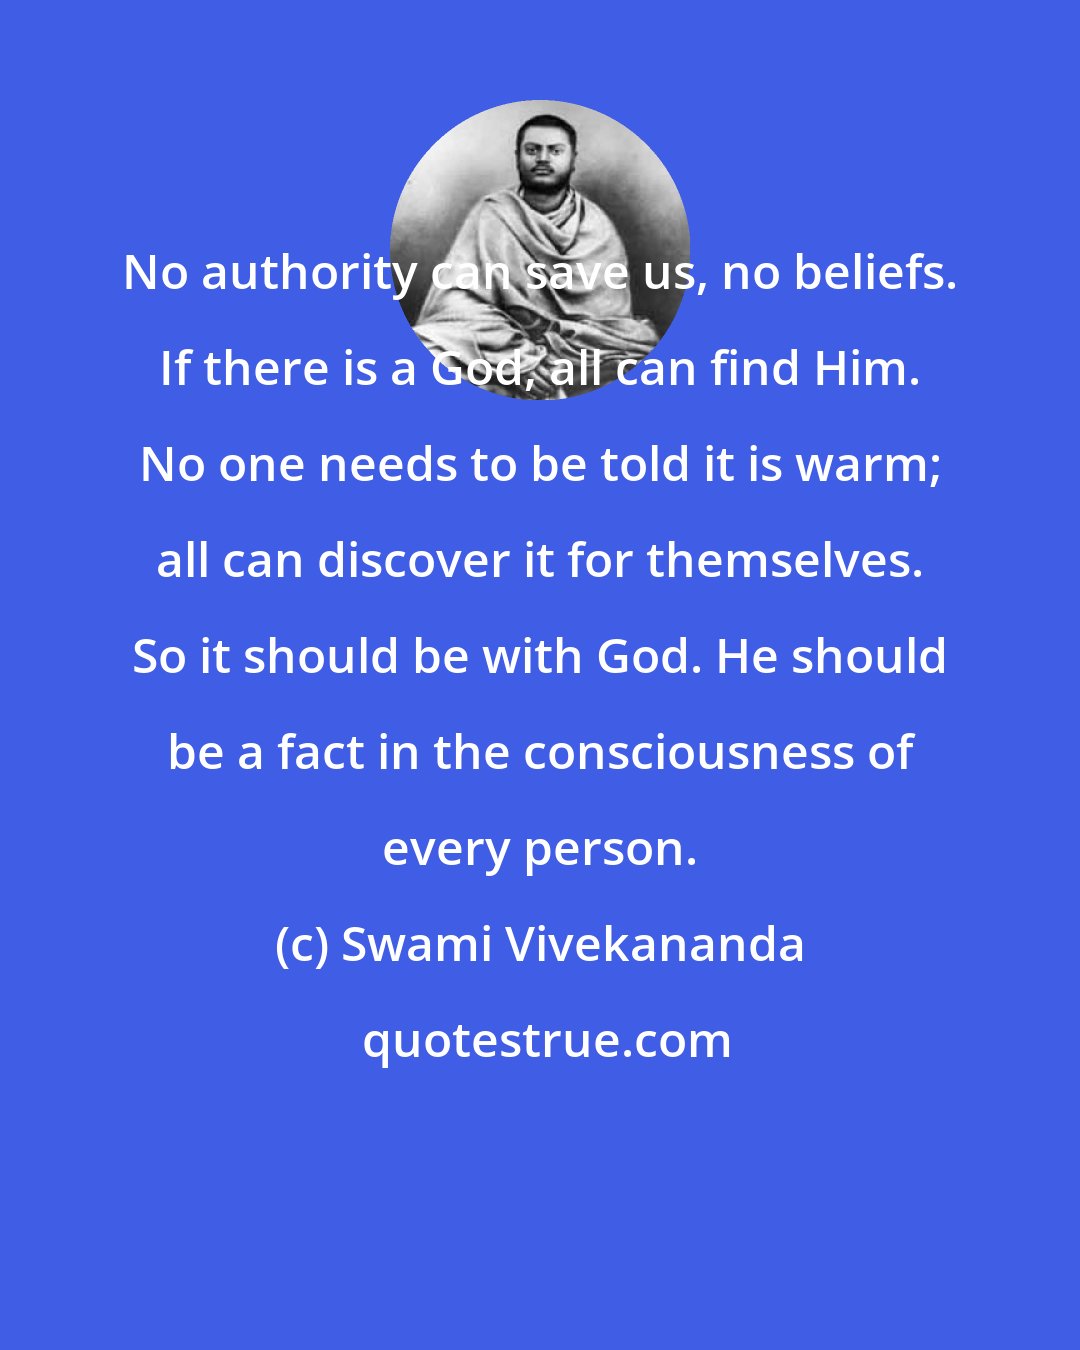 Swami Vivekananda: No authority can save us, no beliefs. If there is a God, all can find Him. No one needs to be told it is warm; all can discover it for themselves. So it should be with God. He should be a fact in the consciousness of every person.